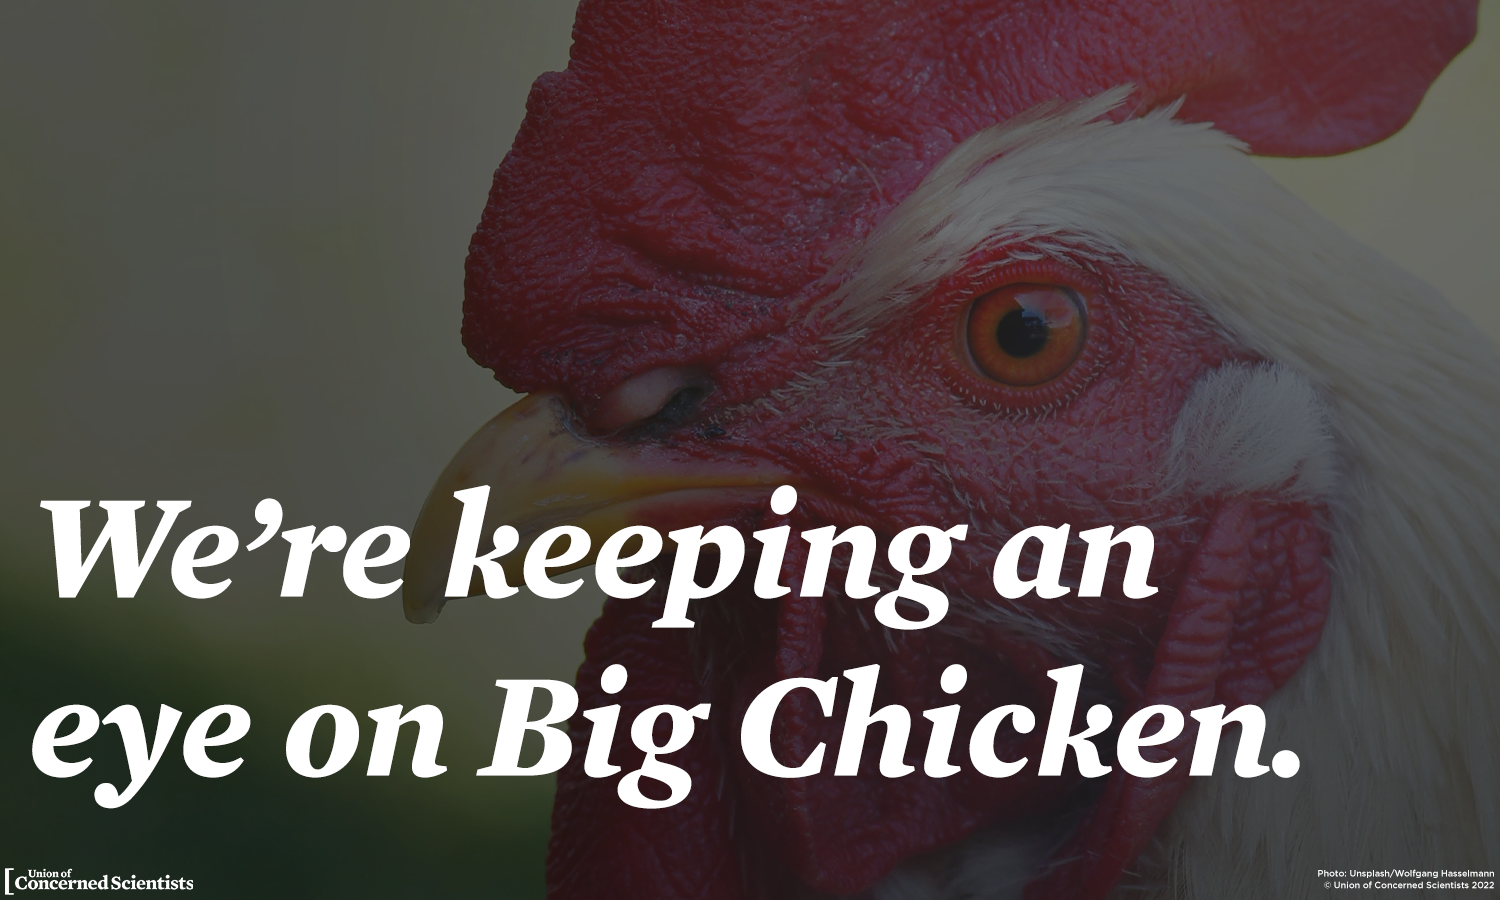 close-up image of a chicken's head in the background, overprinted with the words "We're keeping an eye on Big Chicken"